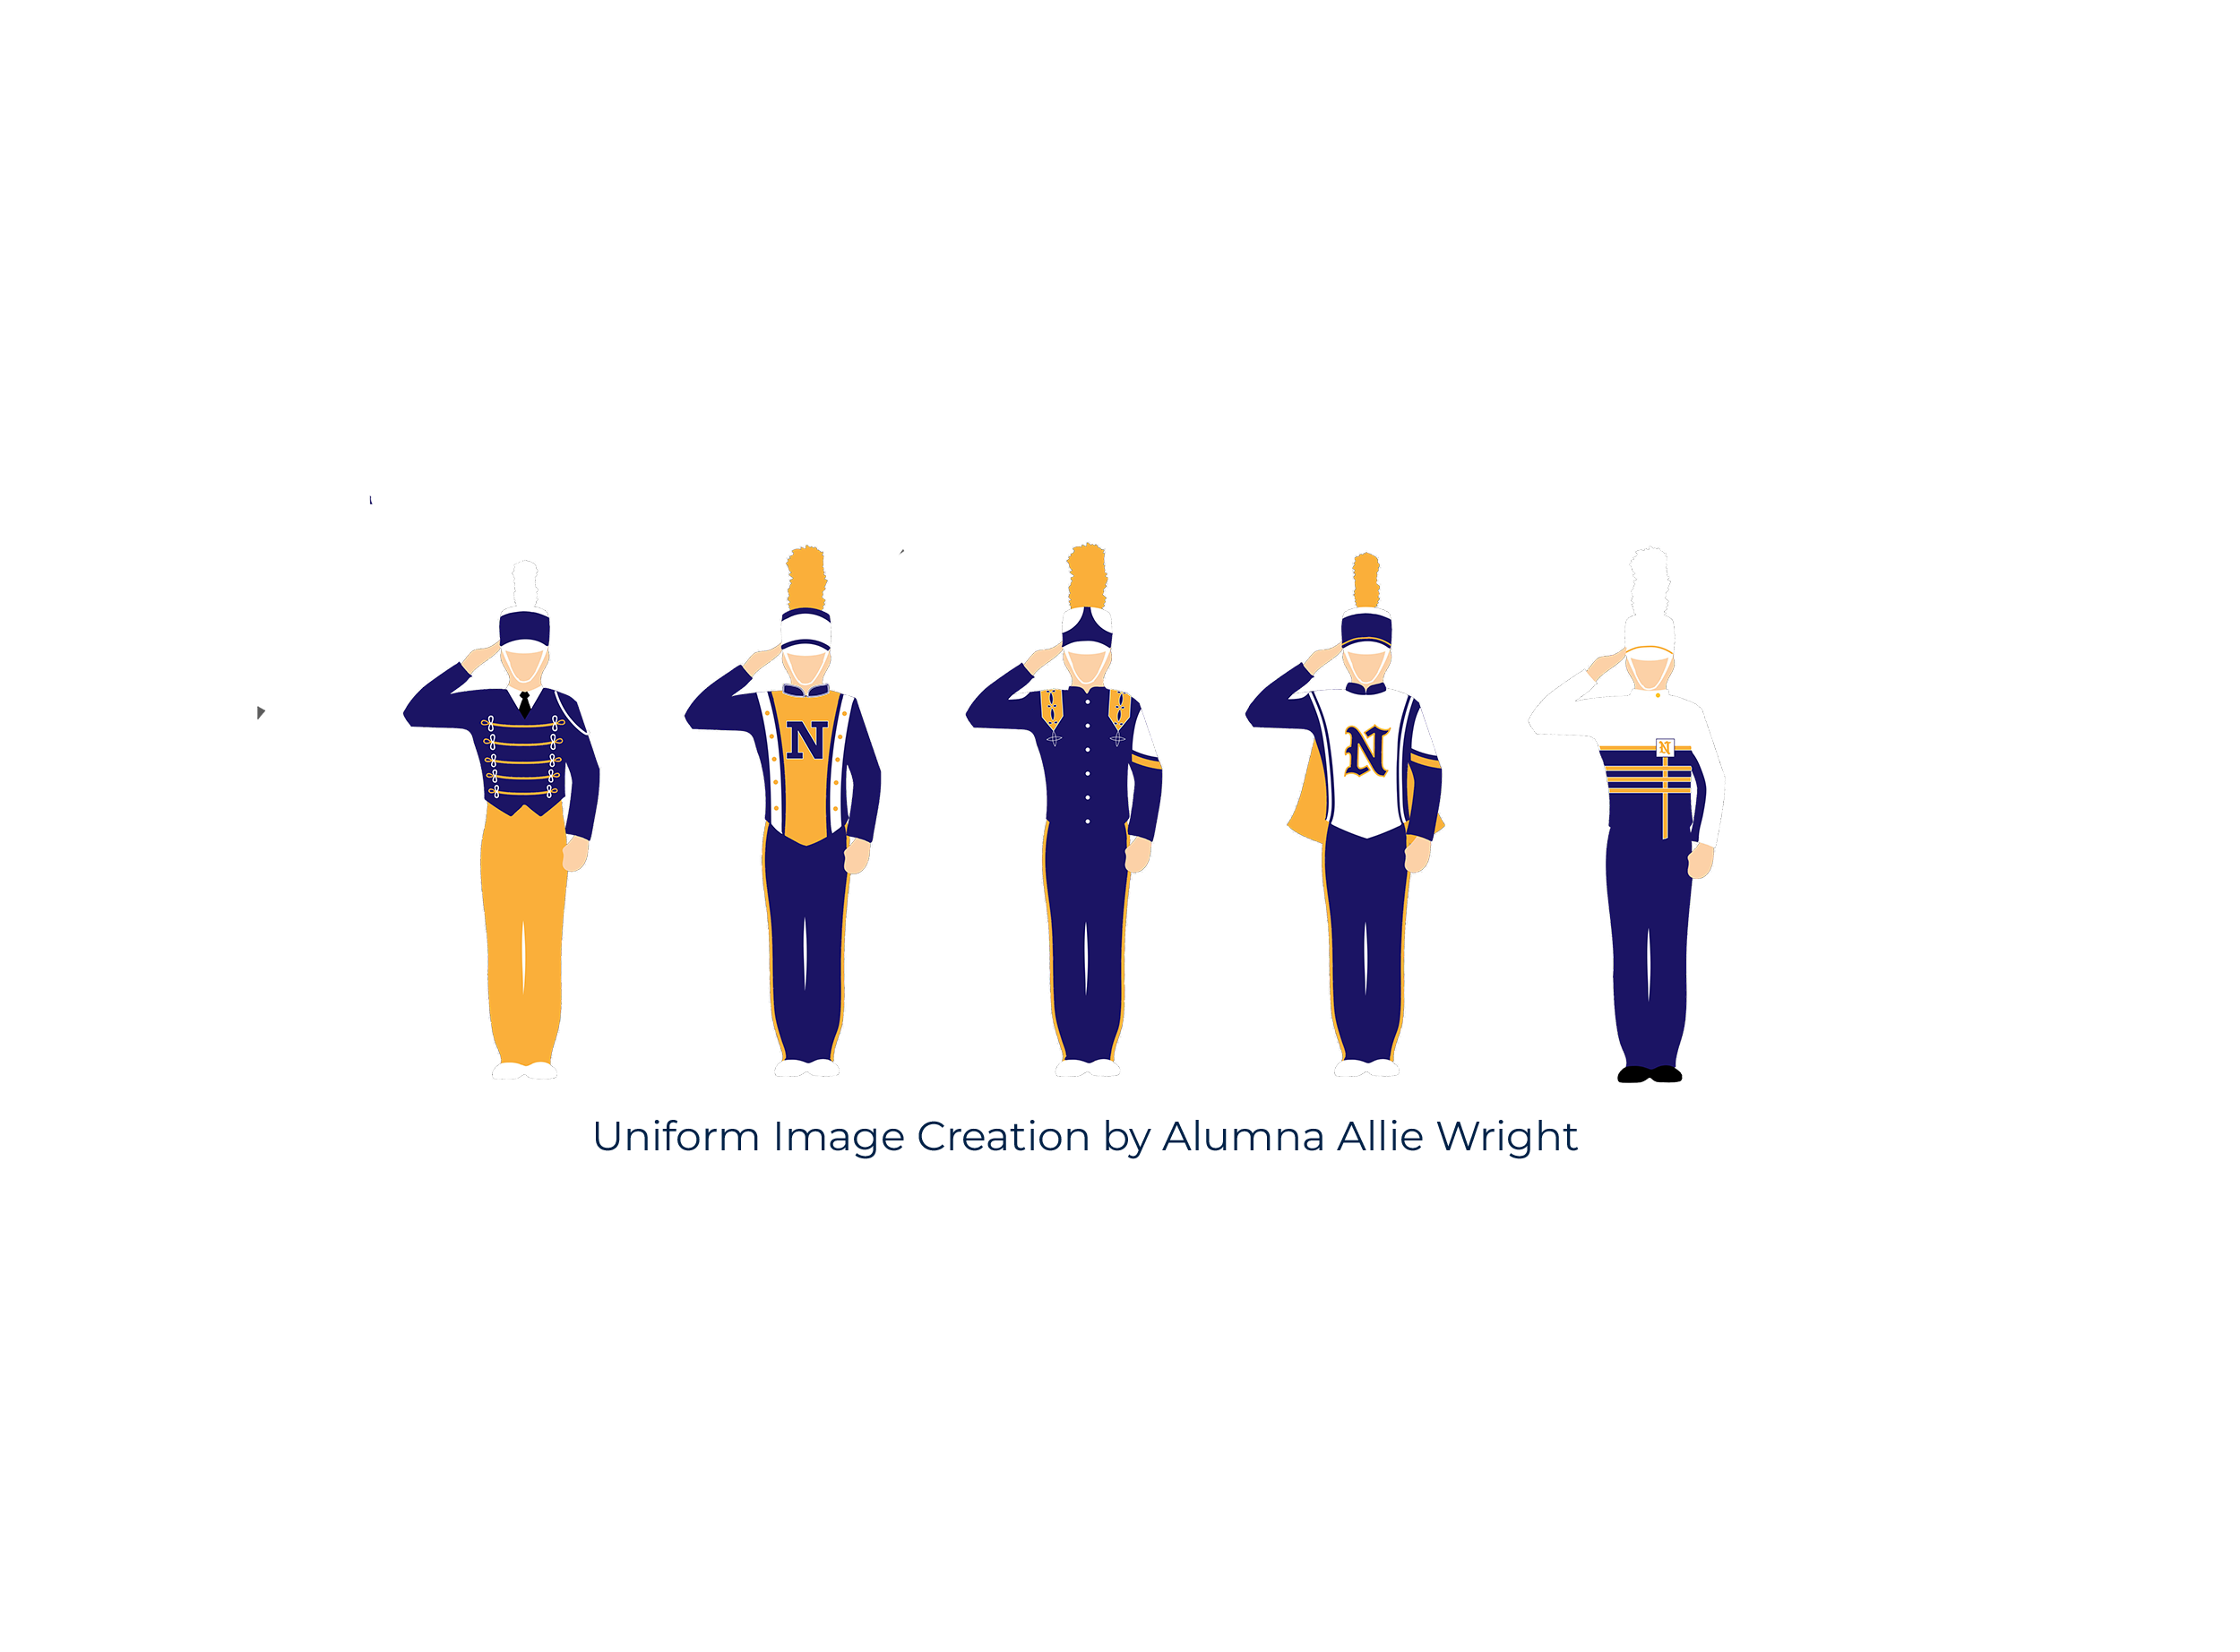 Naples High Band Uniform image created by Alumna Allie Wright